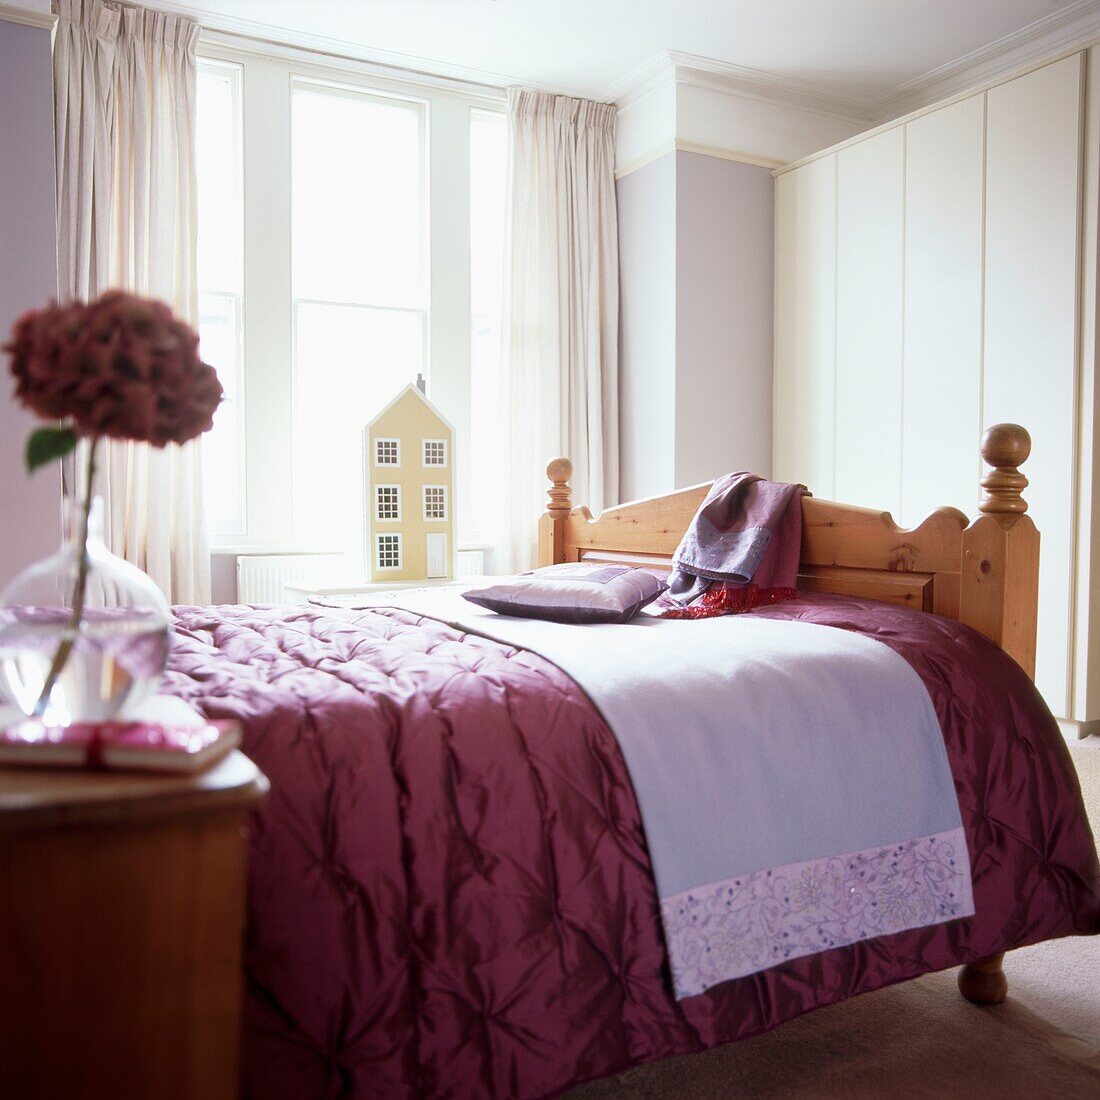 Master bedroom with purple satin quilt on double bed